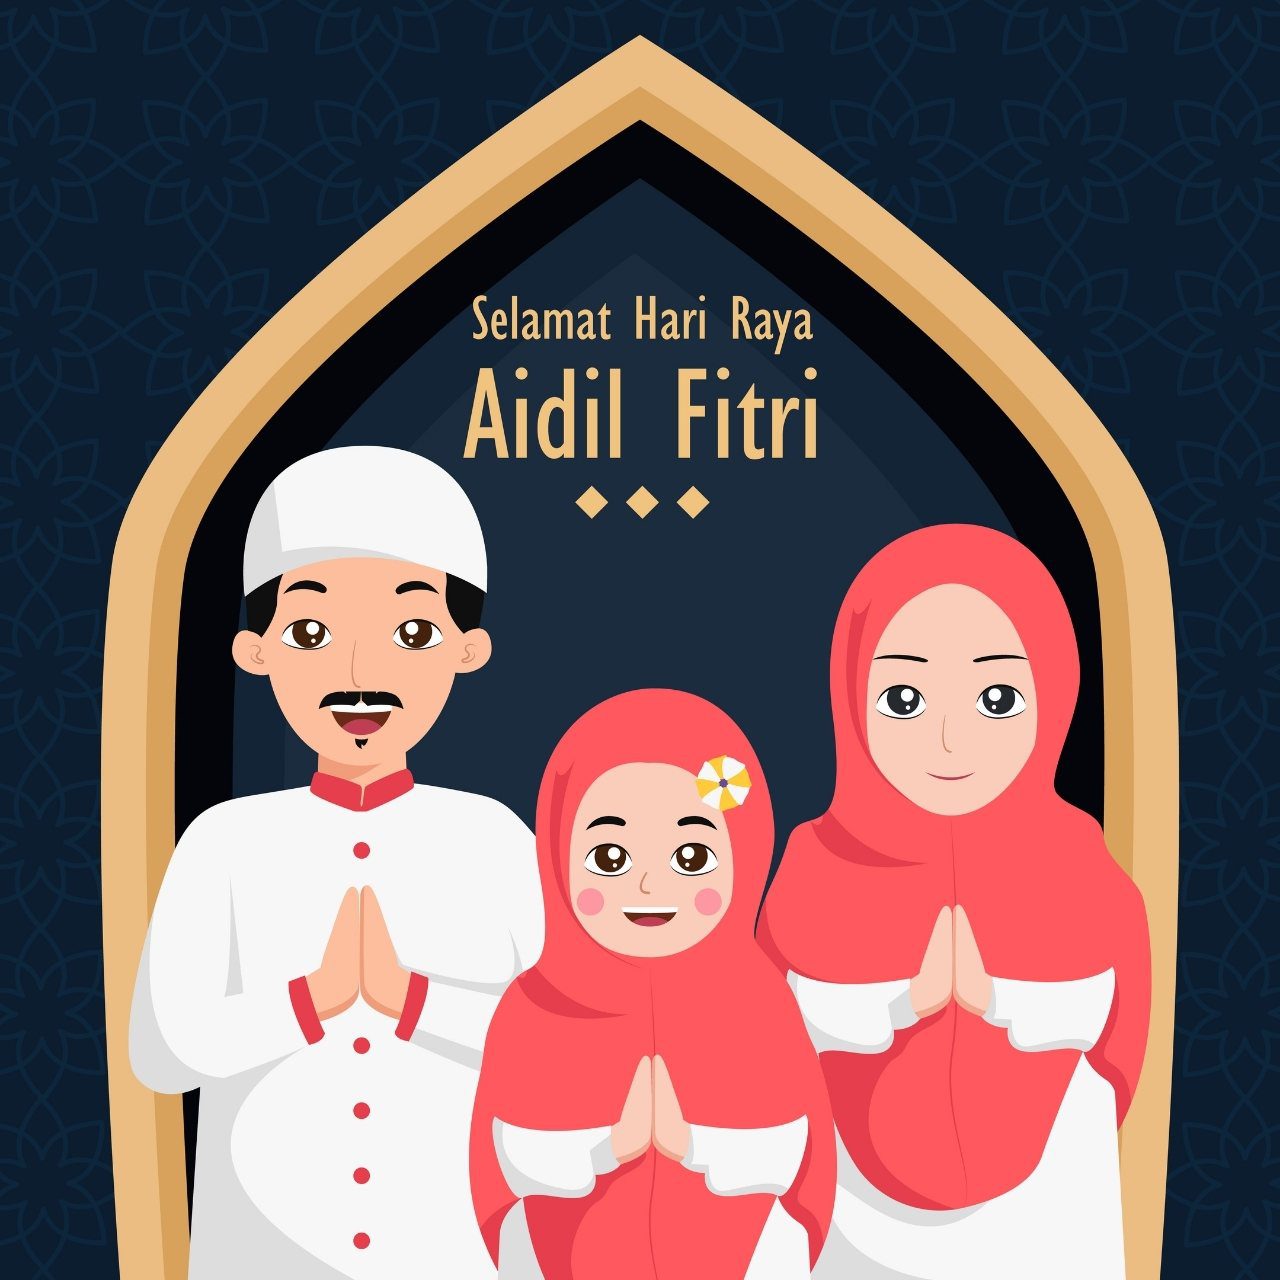 Selamat Hari Raya Aidilfitri 2022: Best Wishes, Greetings, Card, Quotes, Vector, Messages, GIF To Share